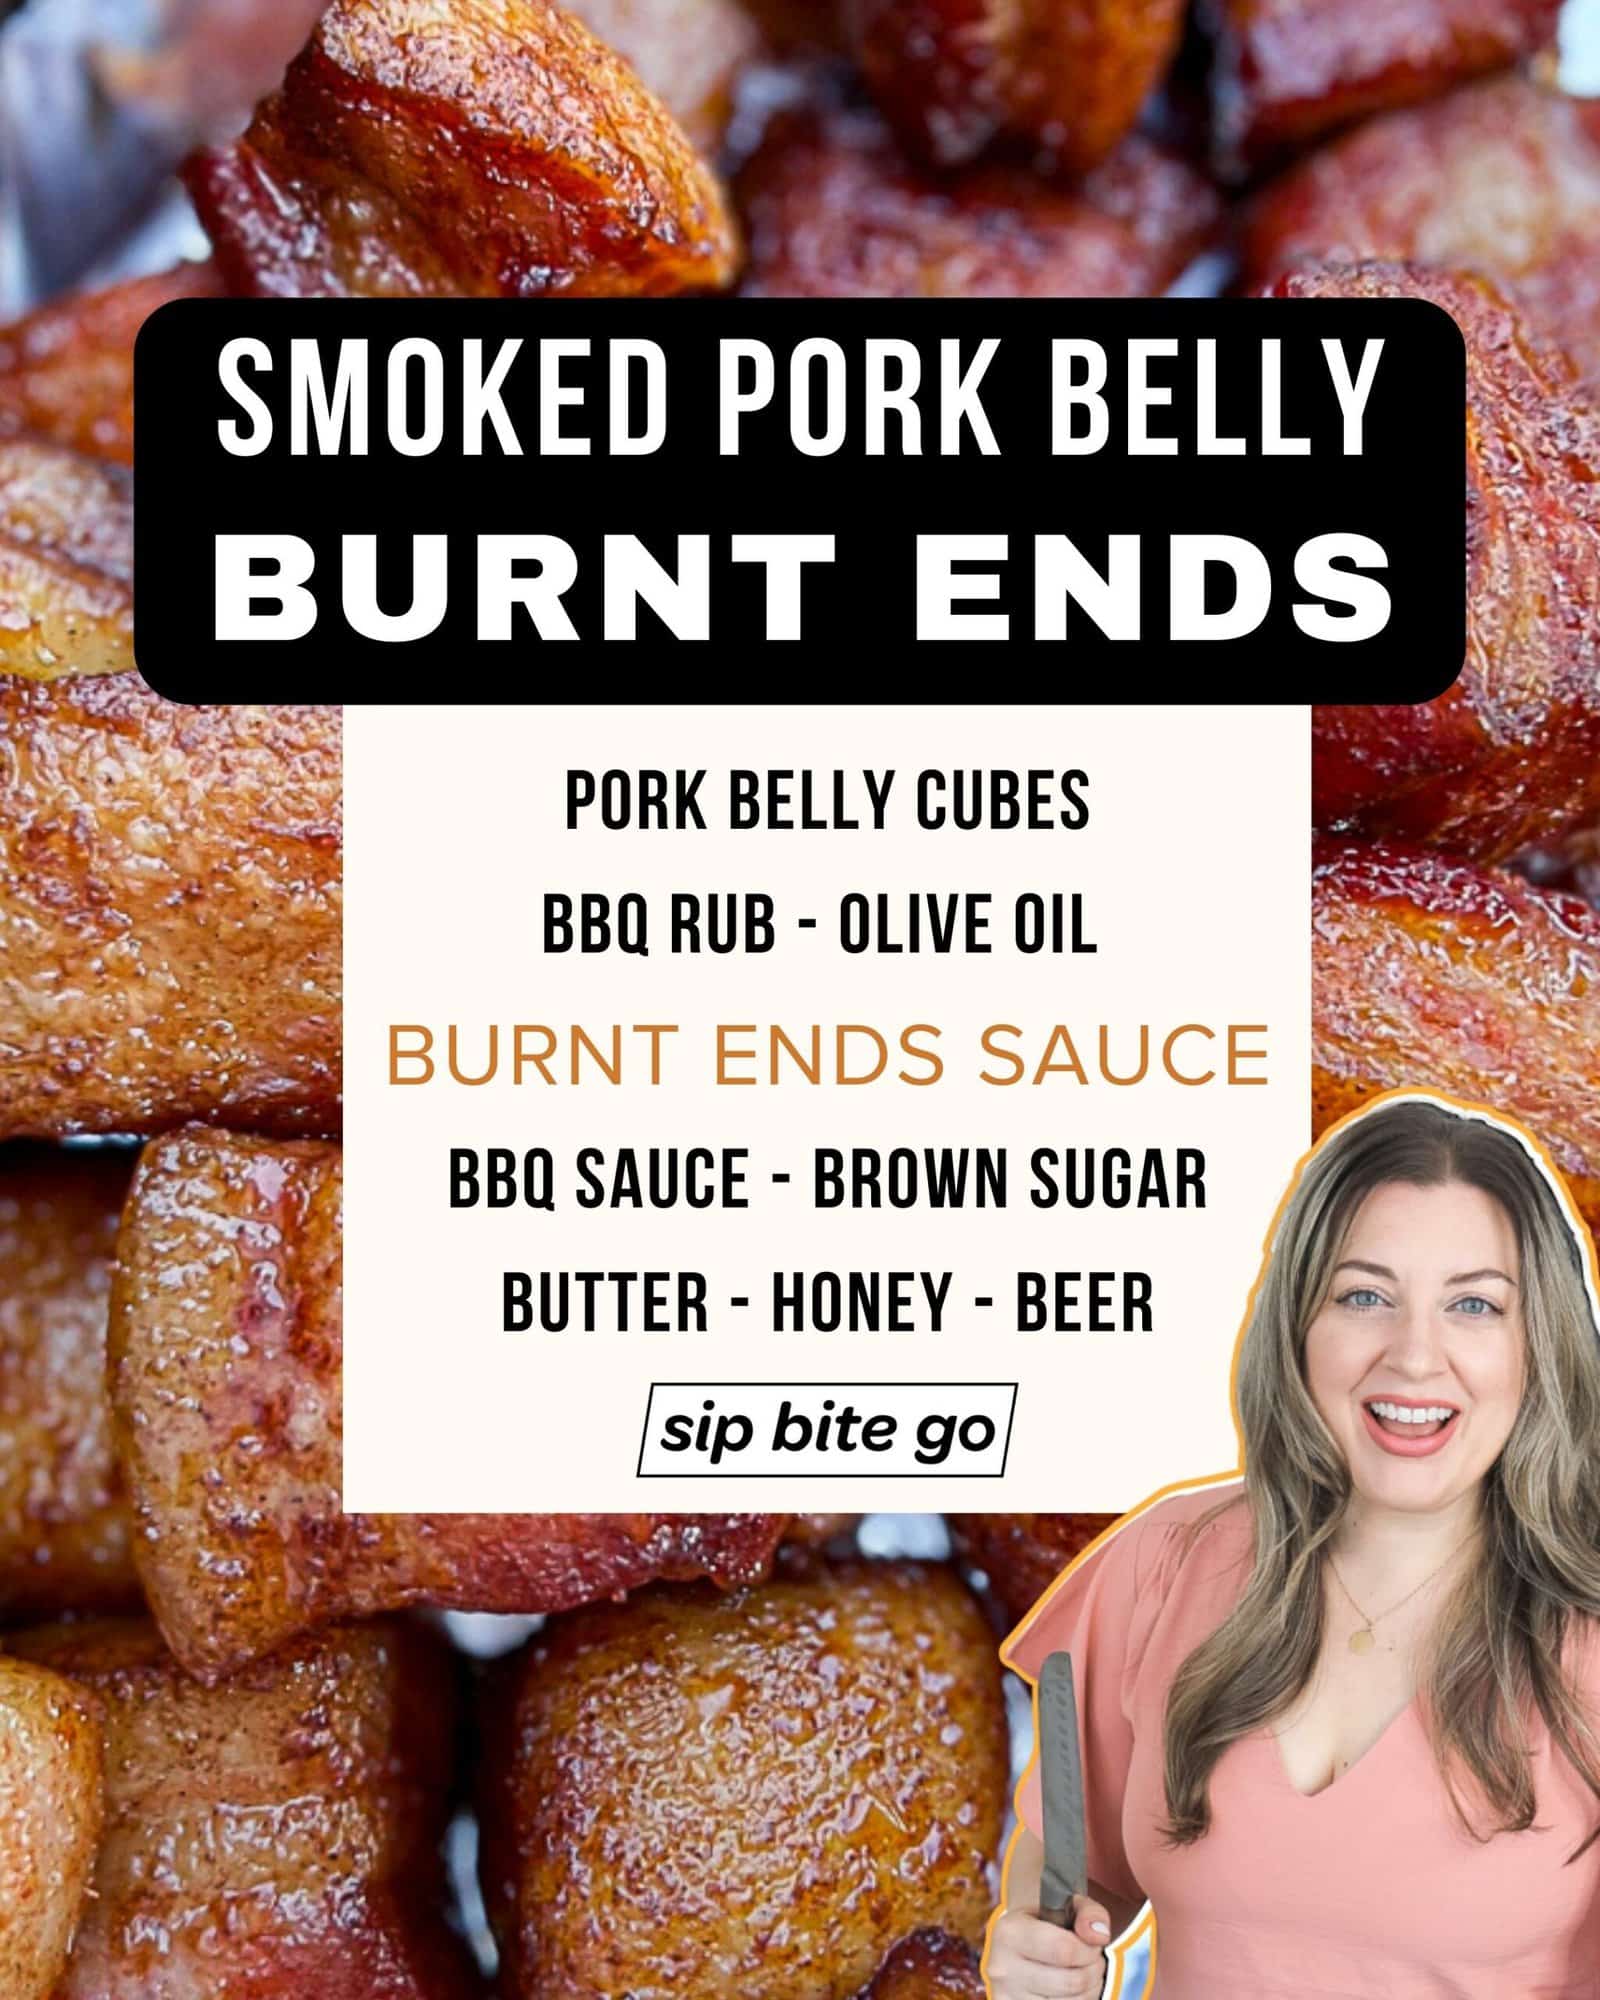 Infographic with ingredients list for smoked pork belly burnt ends recipe